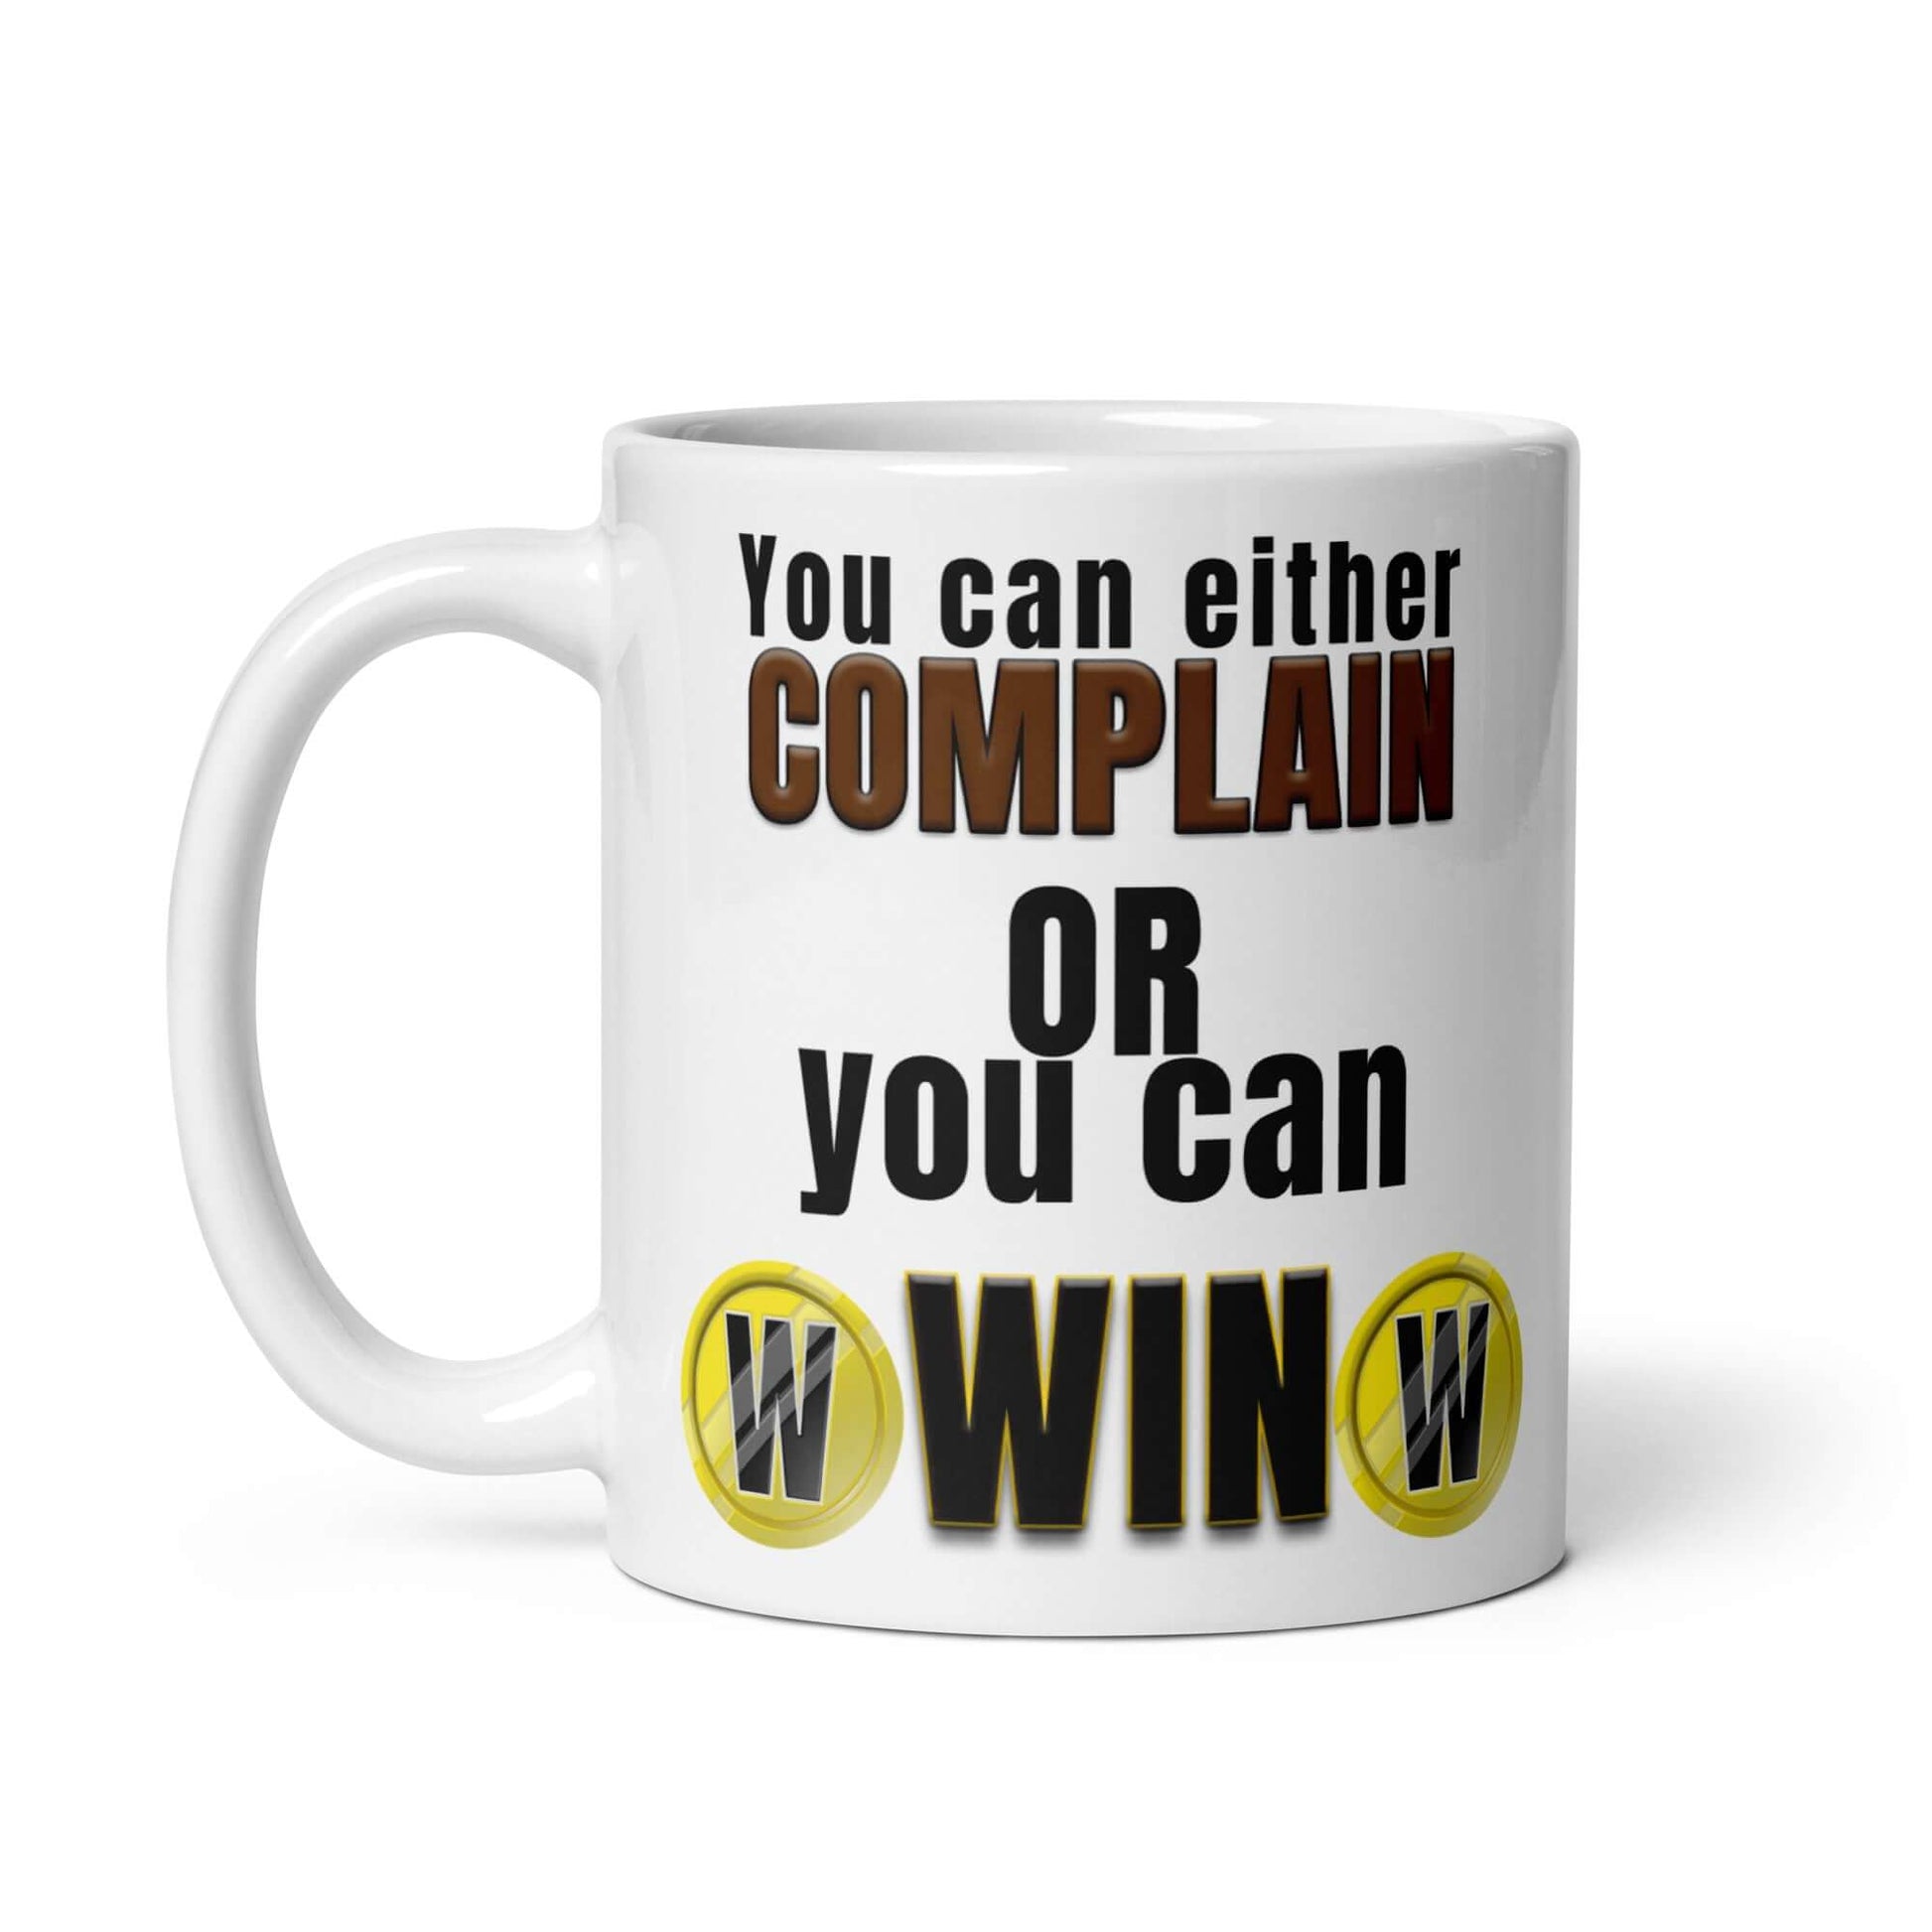 You can either complain, or you can win - White glossy mug coffee Complain friendly Politics white winner WInners Win Winning